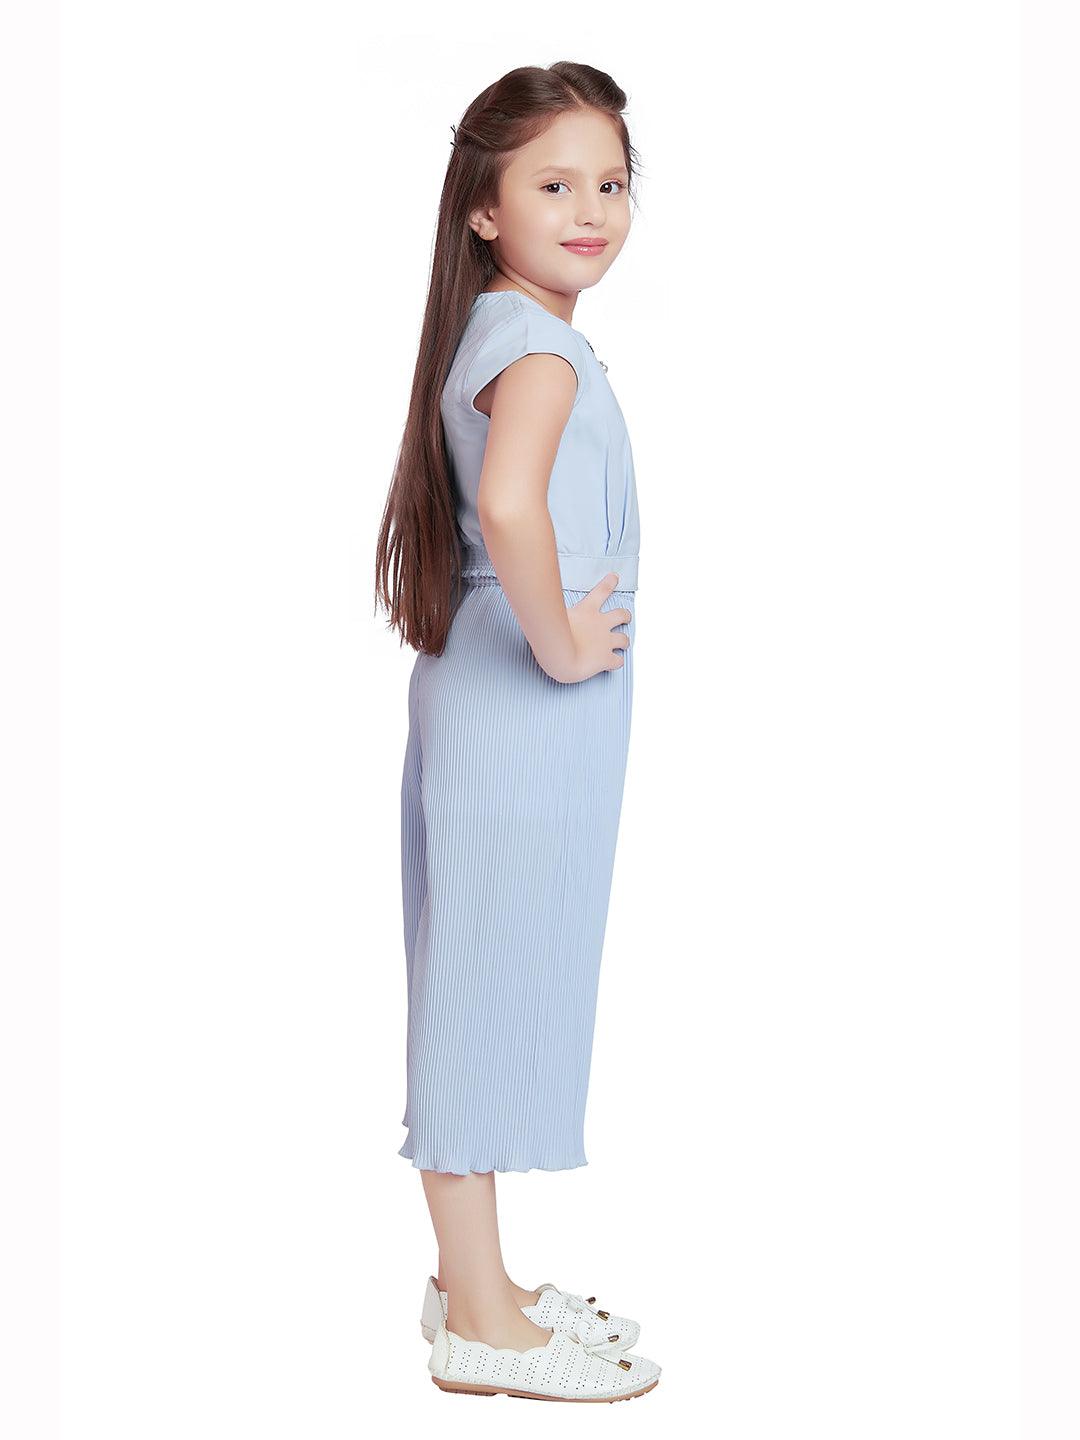 Tiny Baby Sky Blue Colored Culottes- 2091 Sky Blue - TINY BABY INDIA shop.tinybaby.in